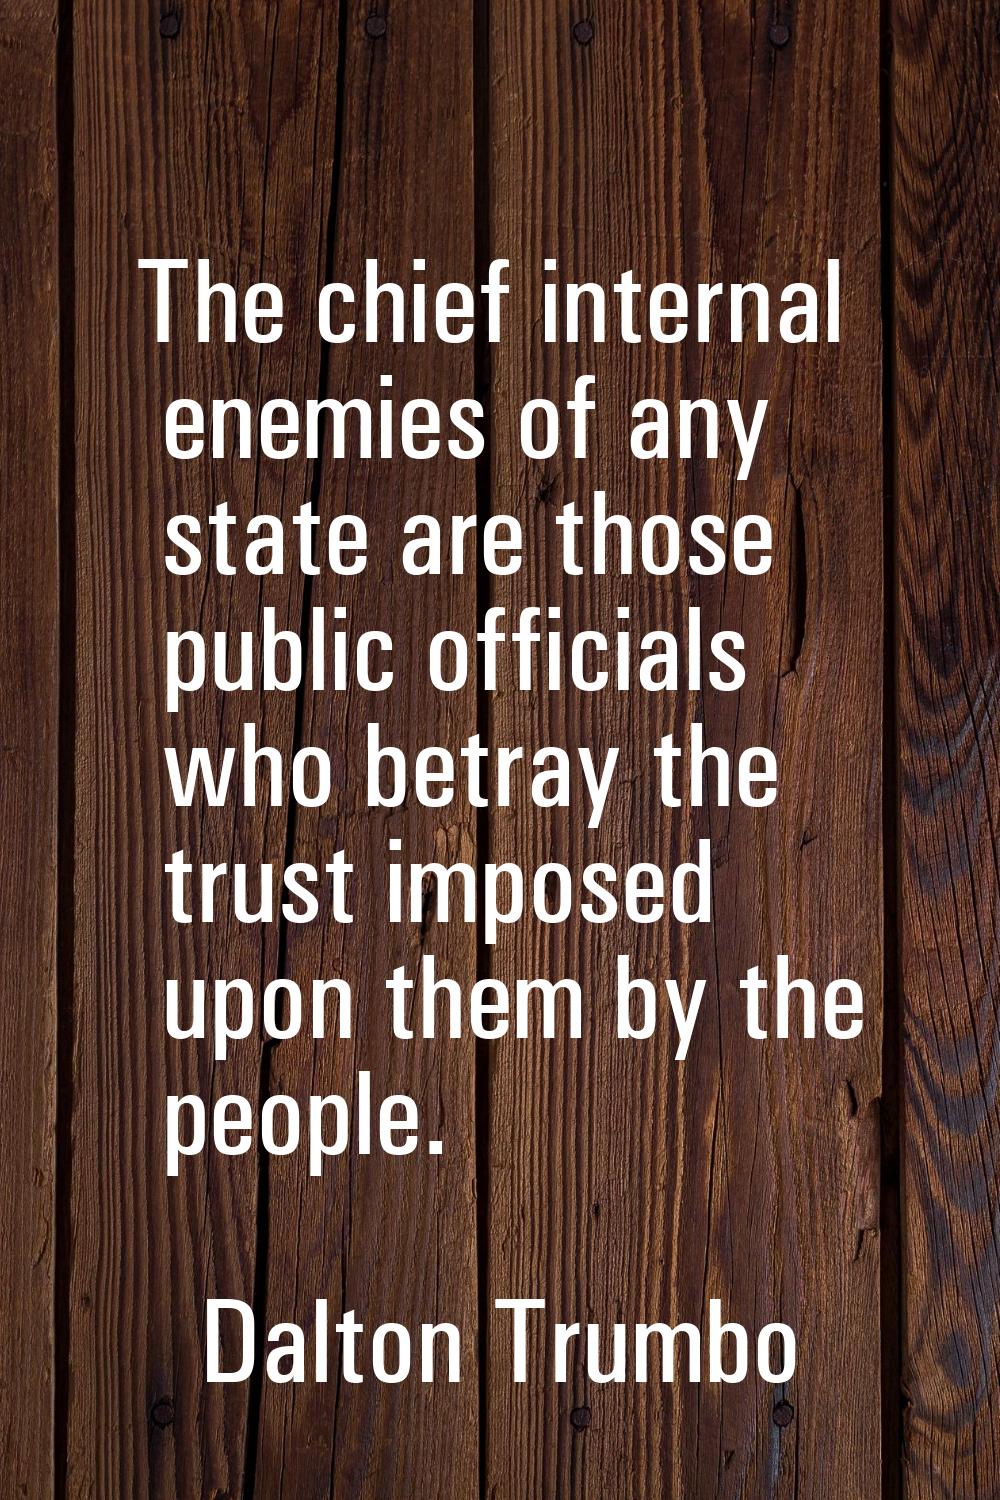 The chief internal enemies of any state are those public officials who betray the trust imposed upo